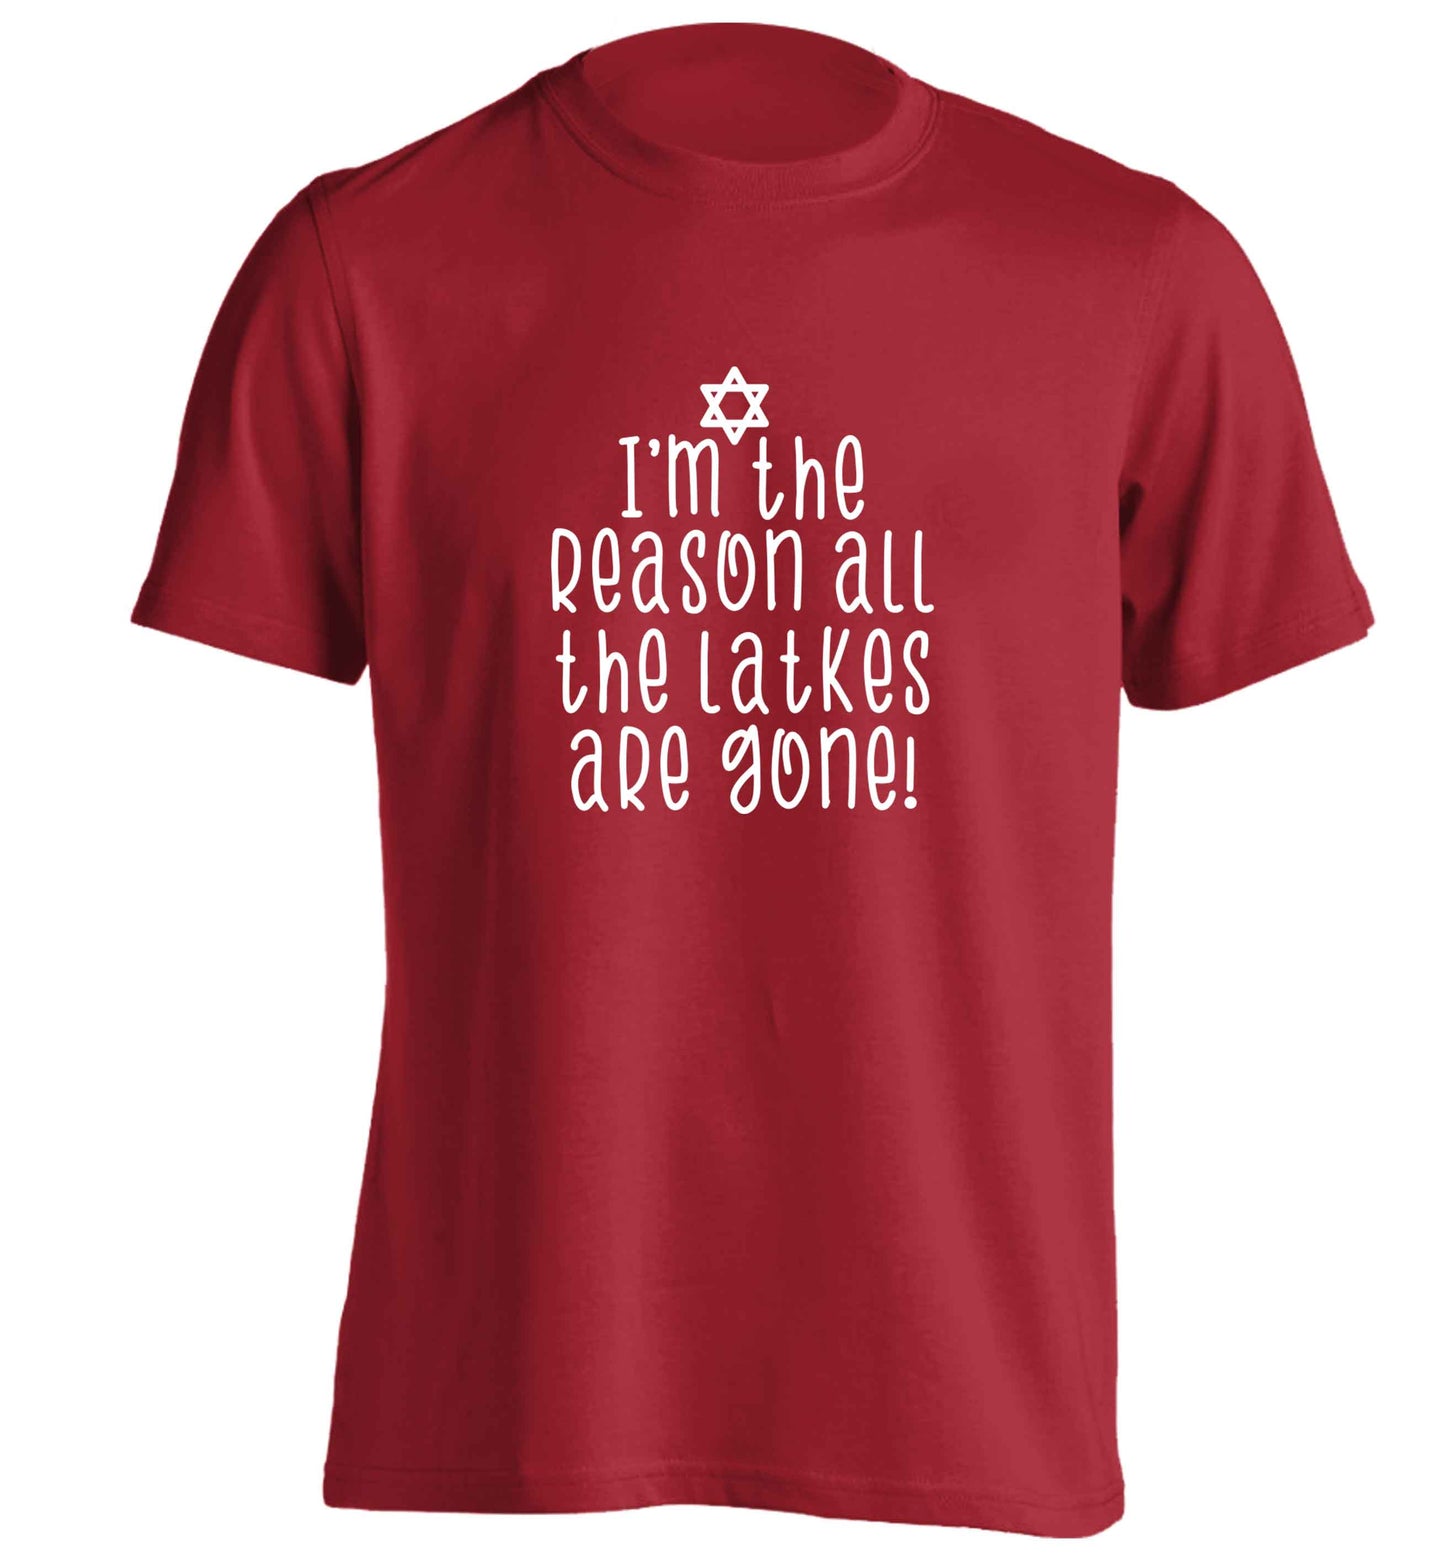 I'm the reason all the latkes are gone adults unisex red Tshirt 2XL